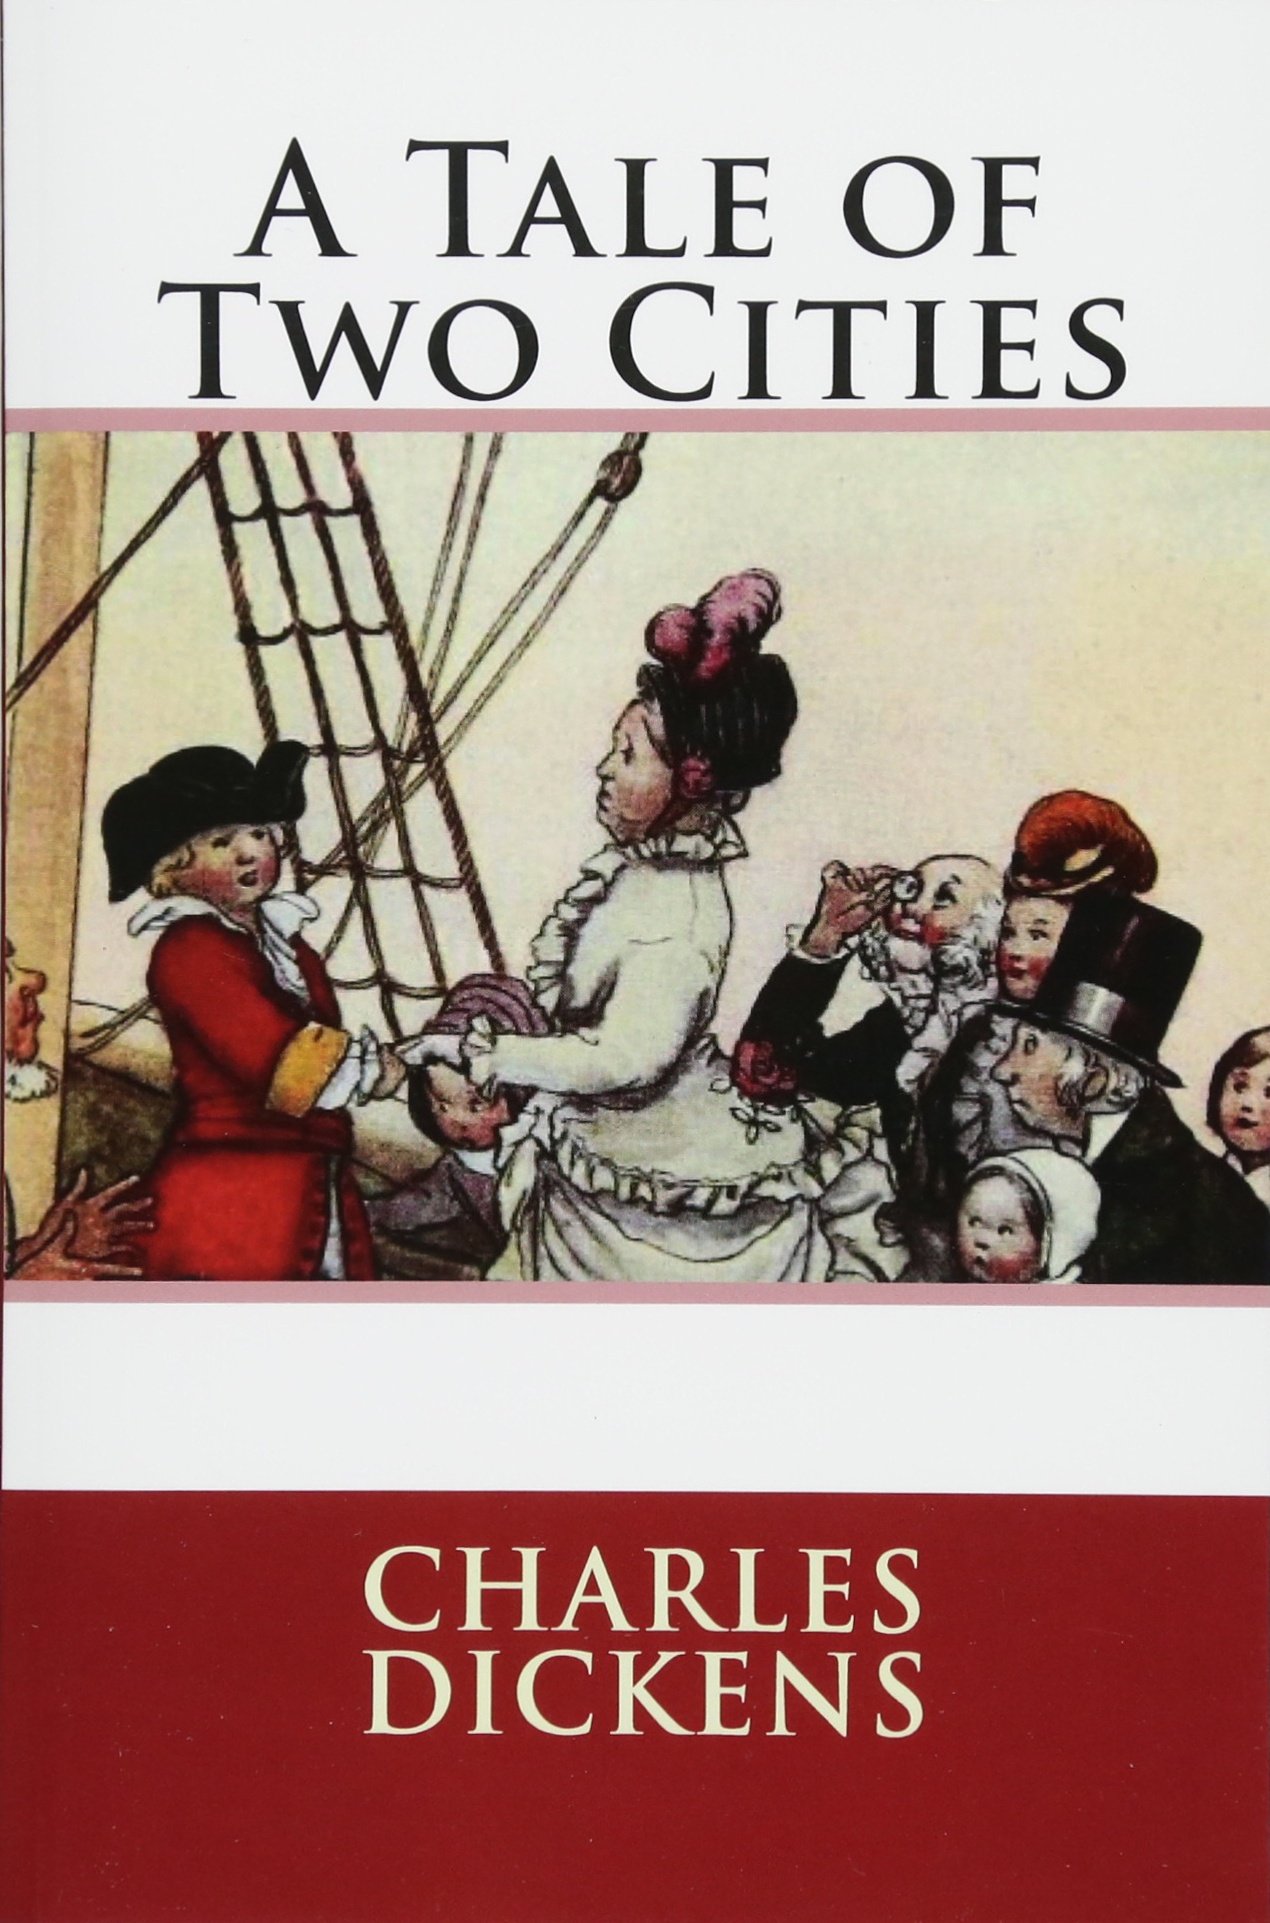 Charles Dickens' A Tale of Two Cities